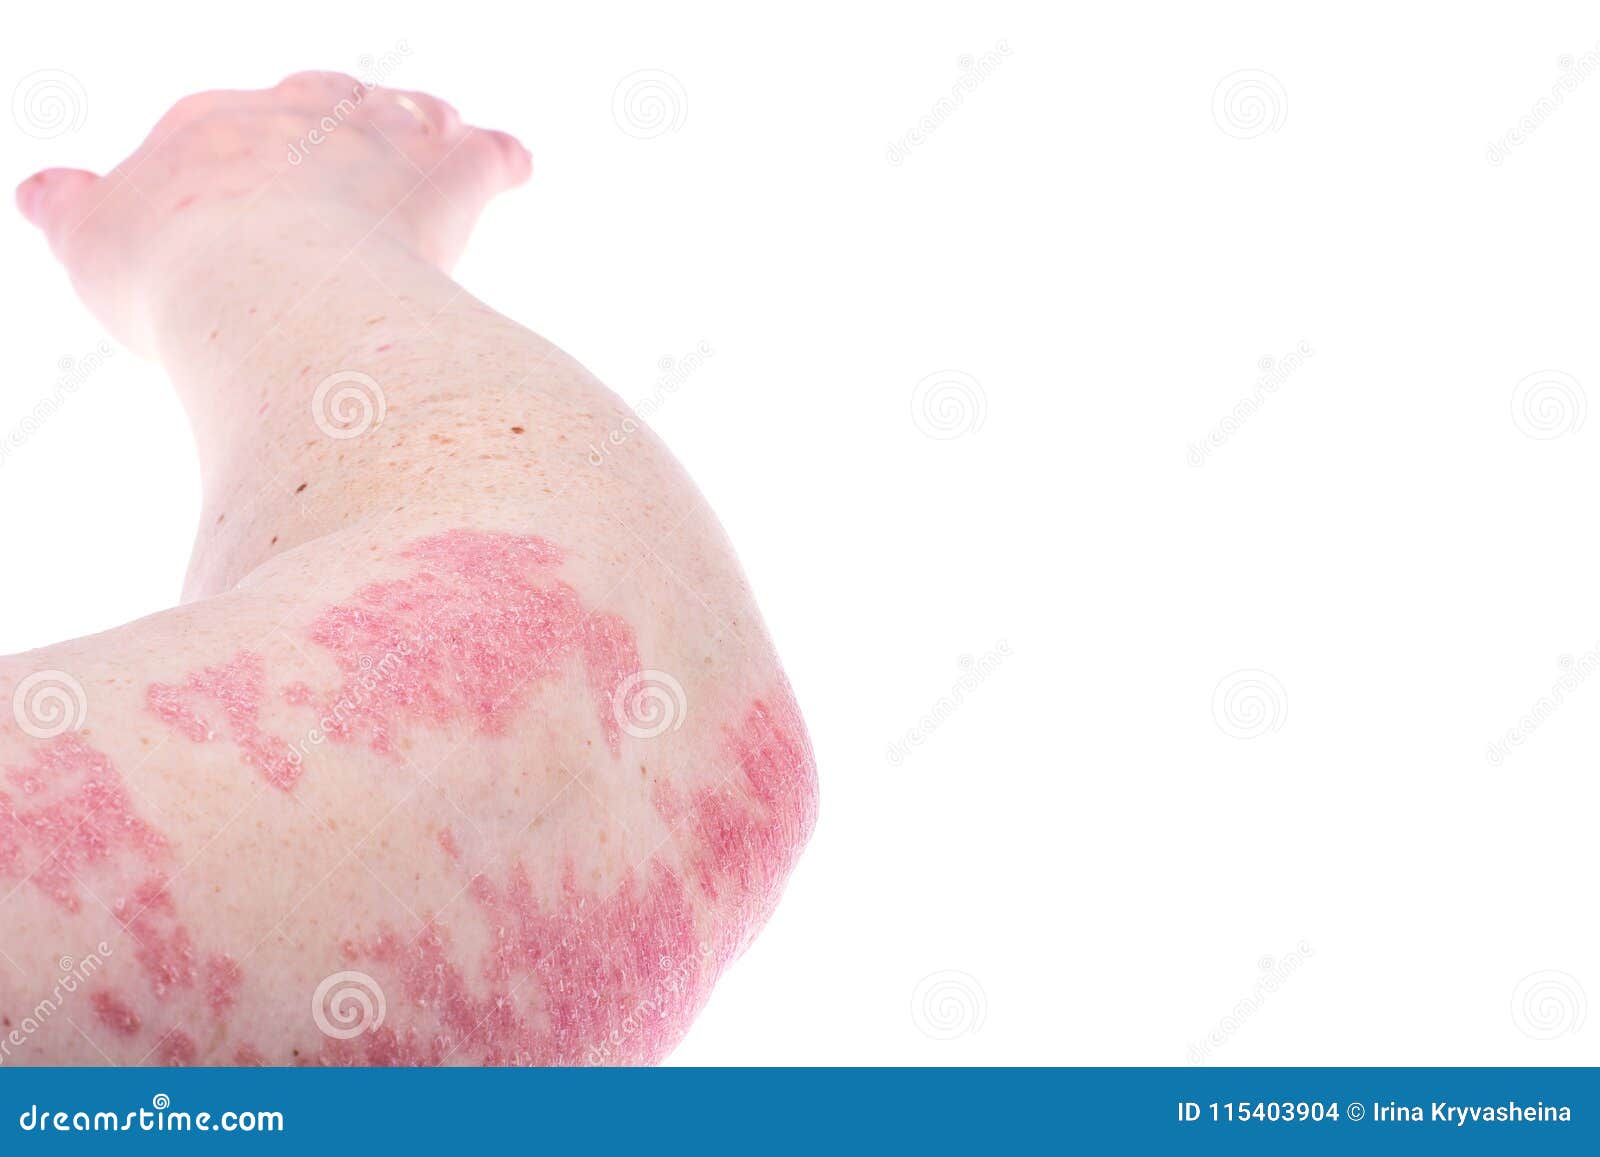 Dermatological Skin Disease Psoriasis More Pronounced On Elbow Hand